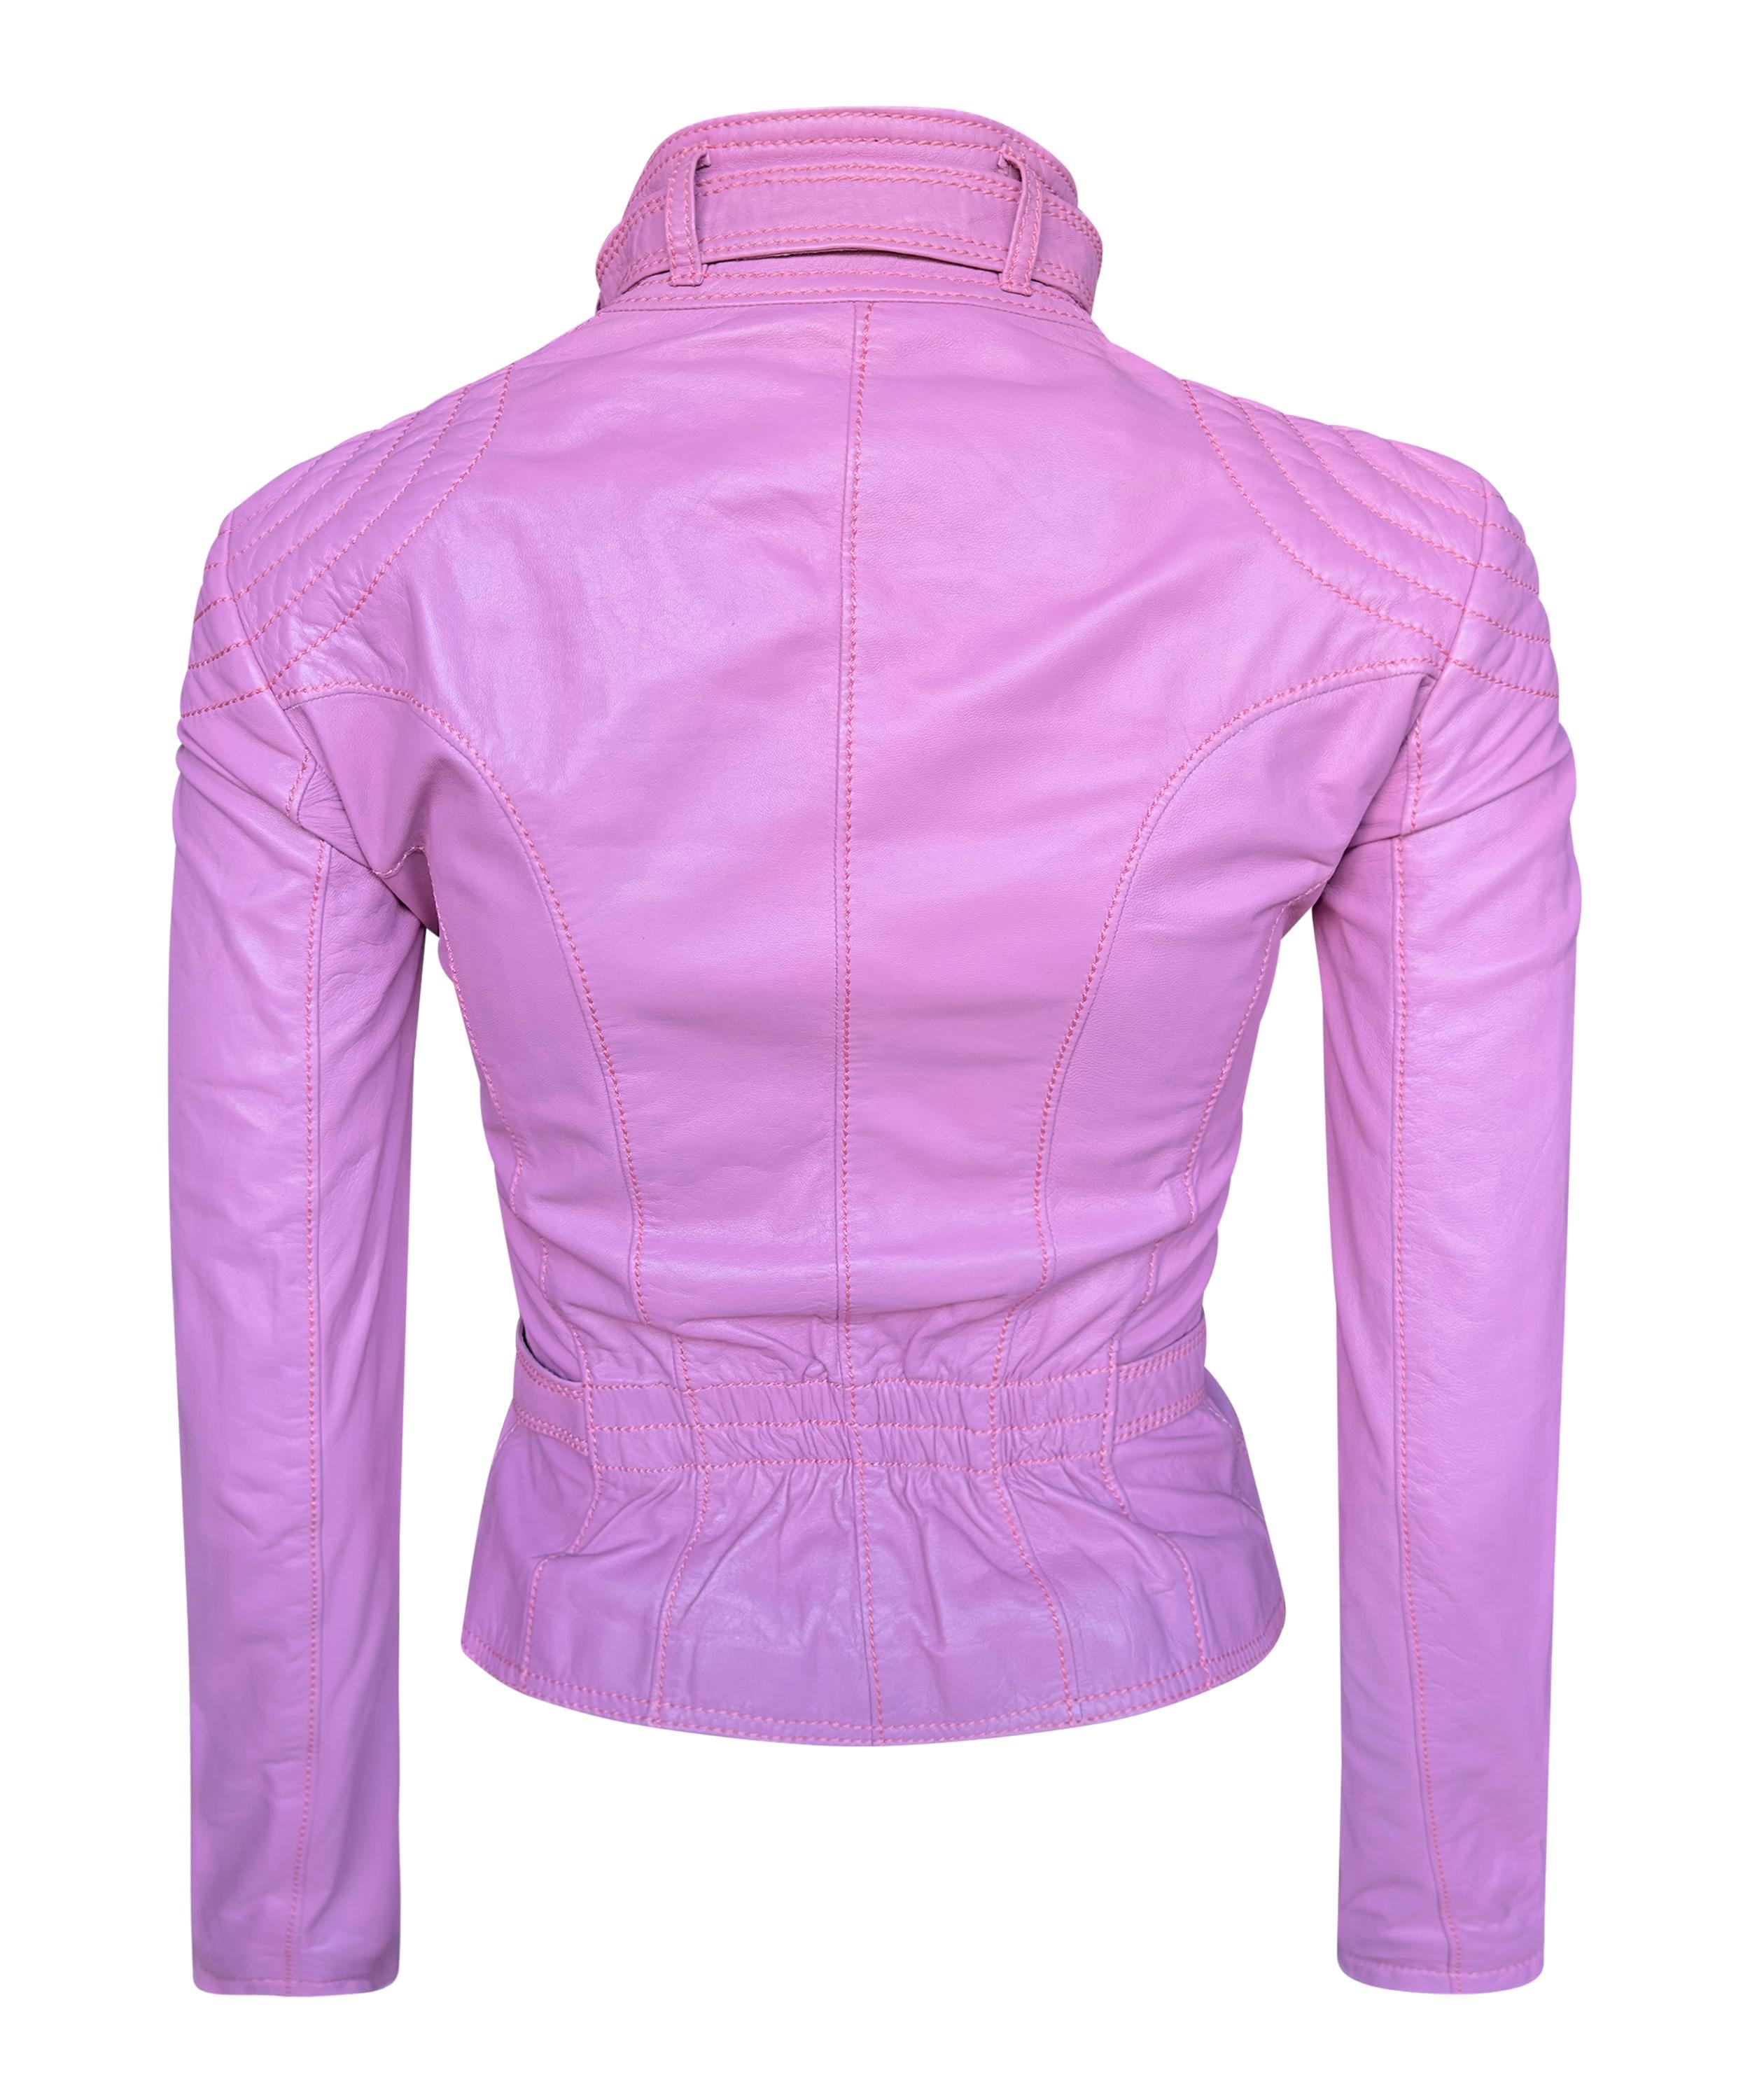 Blumarine Pink Biker Leather Jacket  XS In Excellent Condition For Sale In London, GB